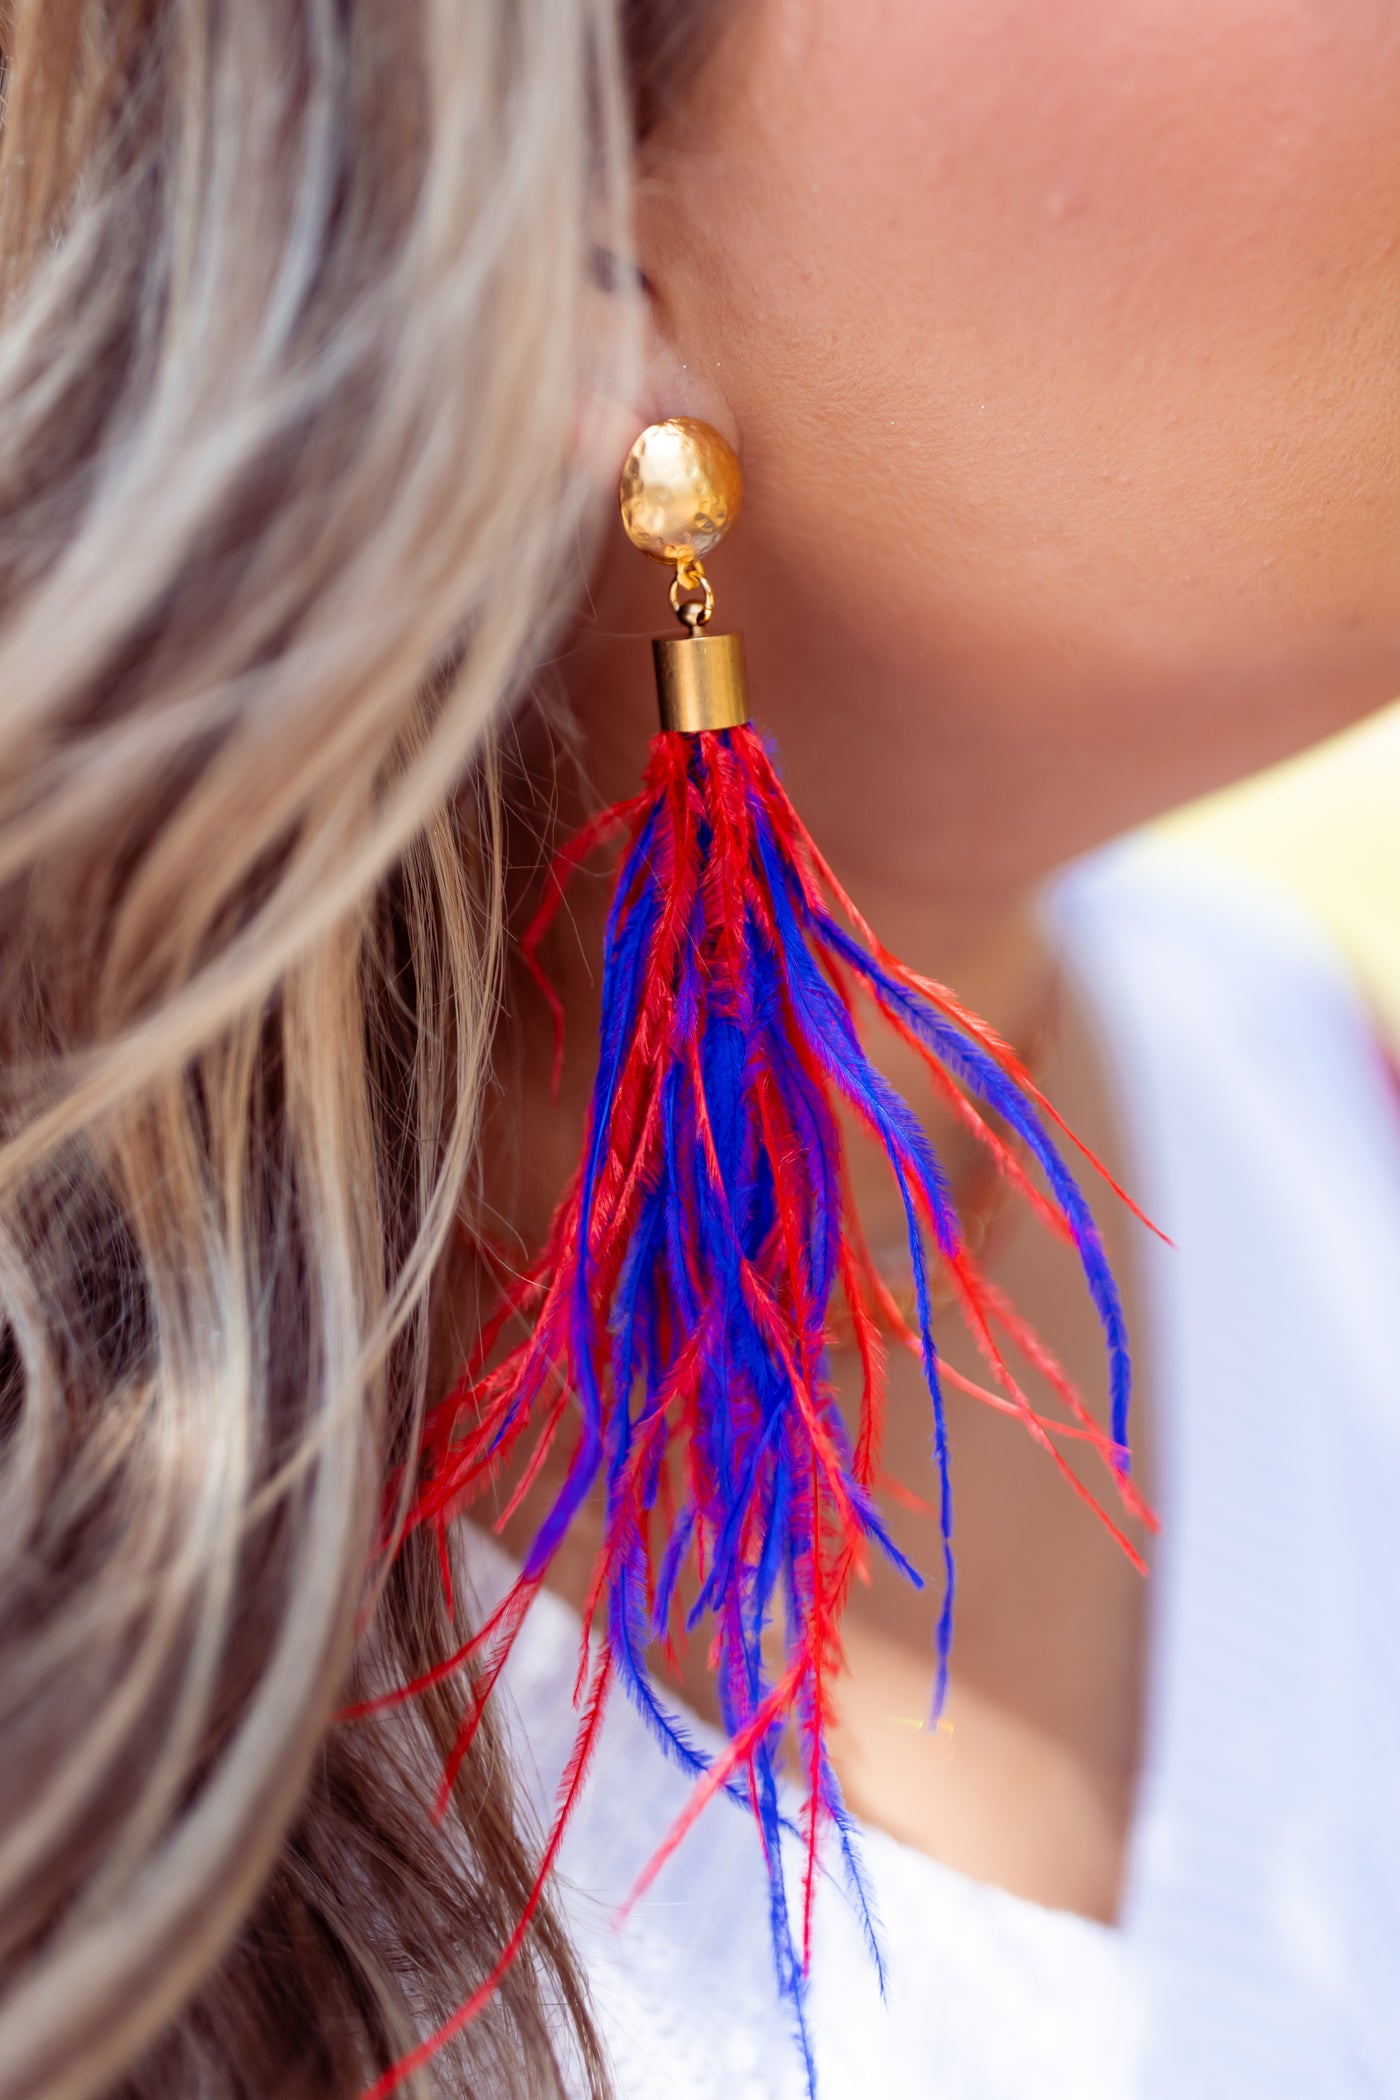 Virtue Jewelry Hammered Dome Post With Red & Blue Feather Drop Earrings